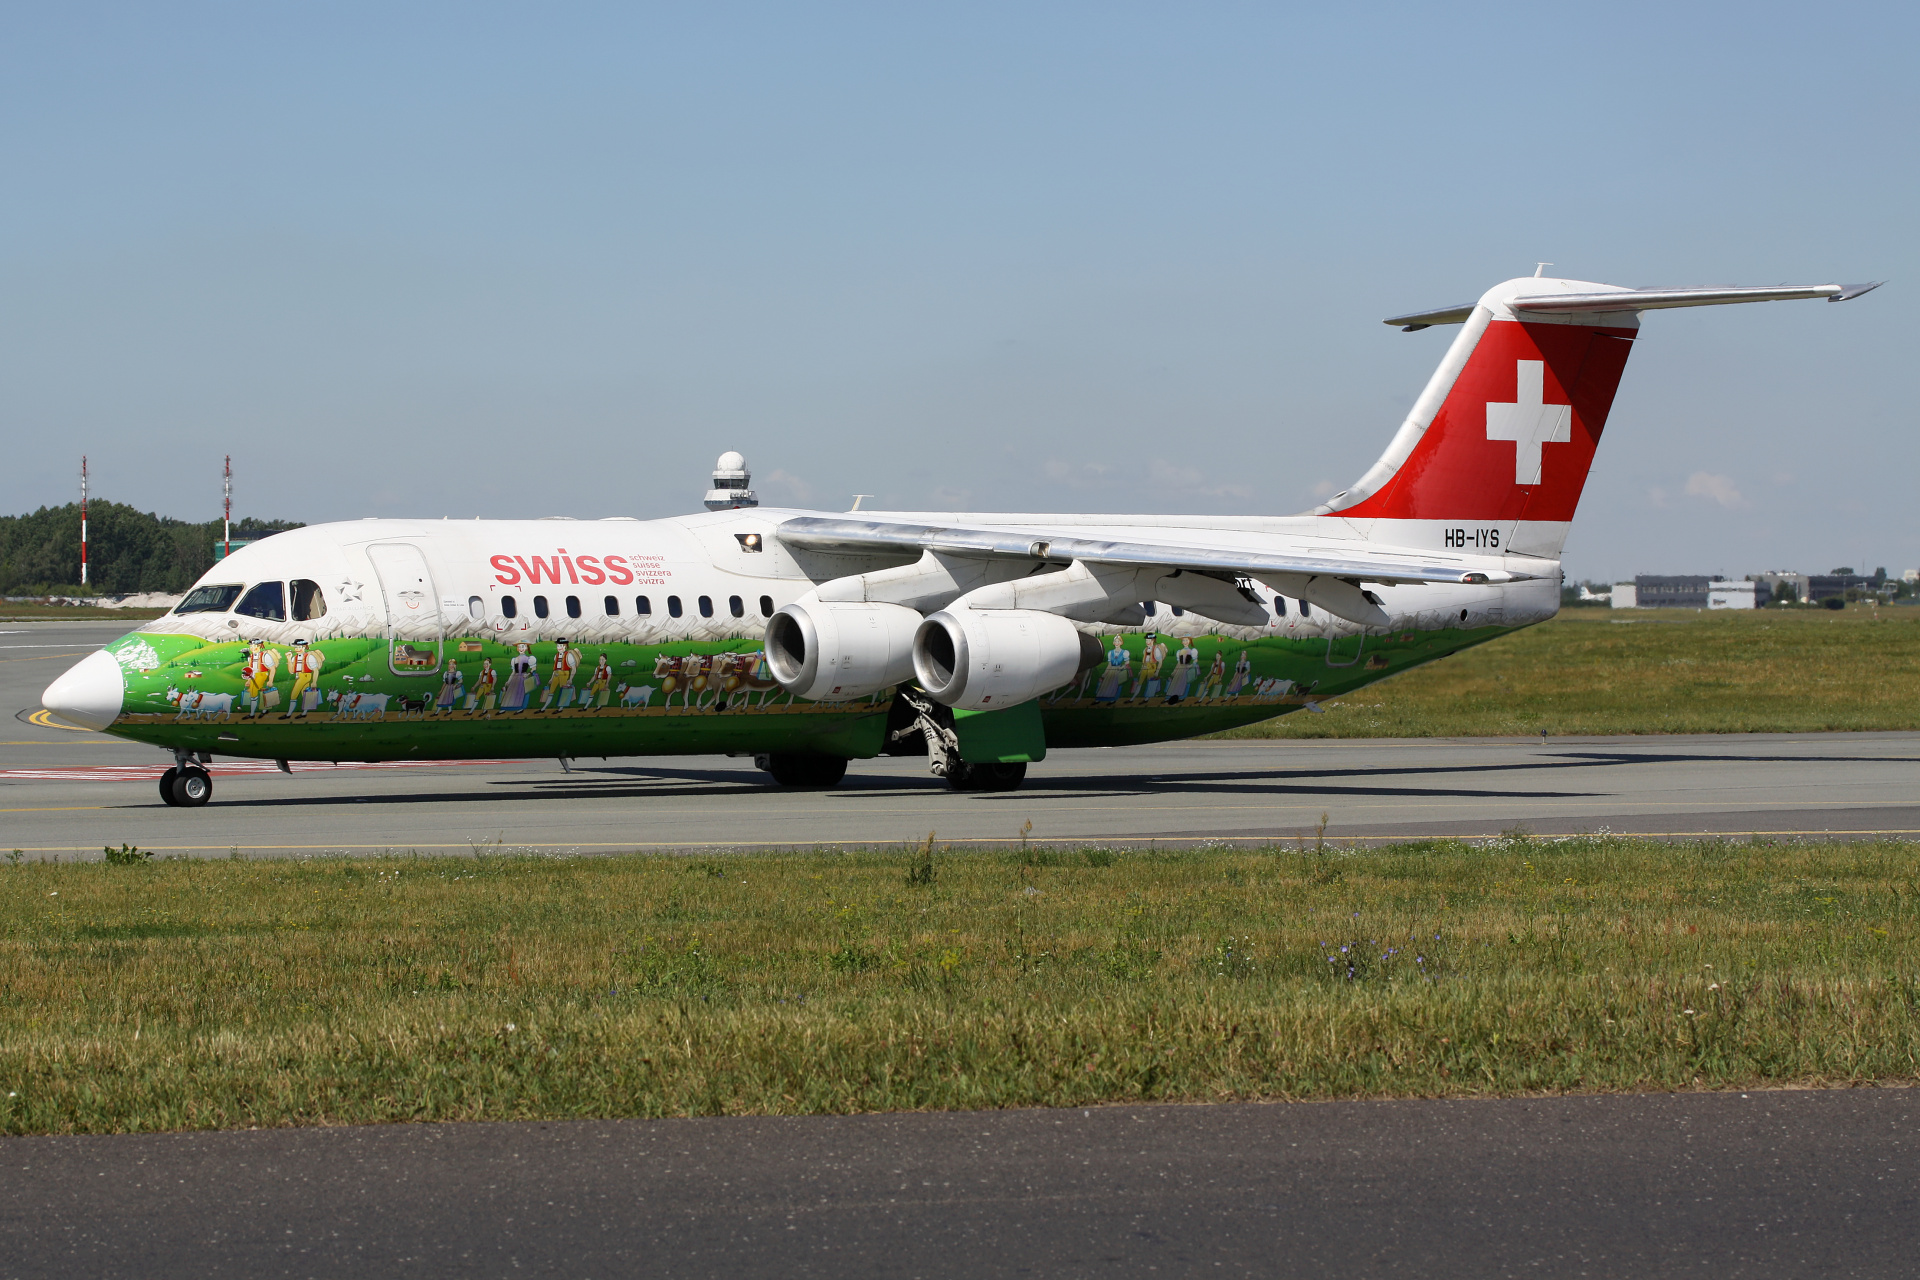 HB-IYS (Zurich Airport Shopping Paradise livery) (Aircraft » EPWA Spotting » BAe 146 and revisions » Avro RJ100 » Swiss Global Air Lines)